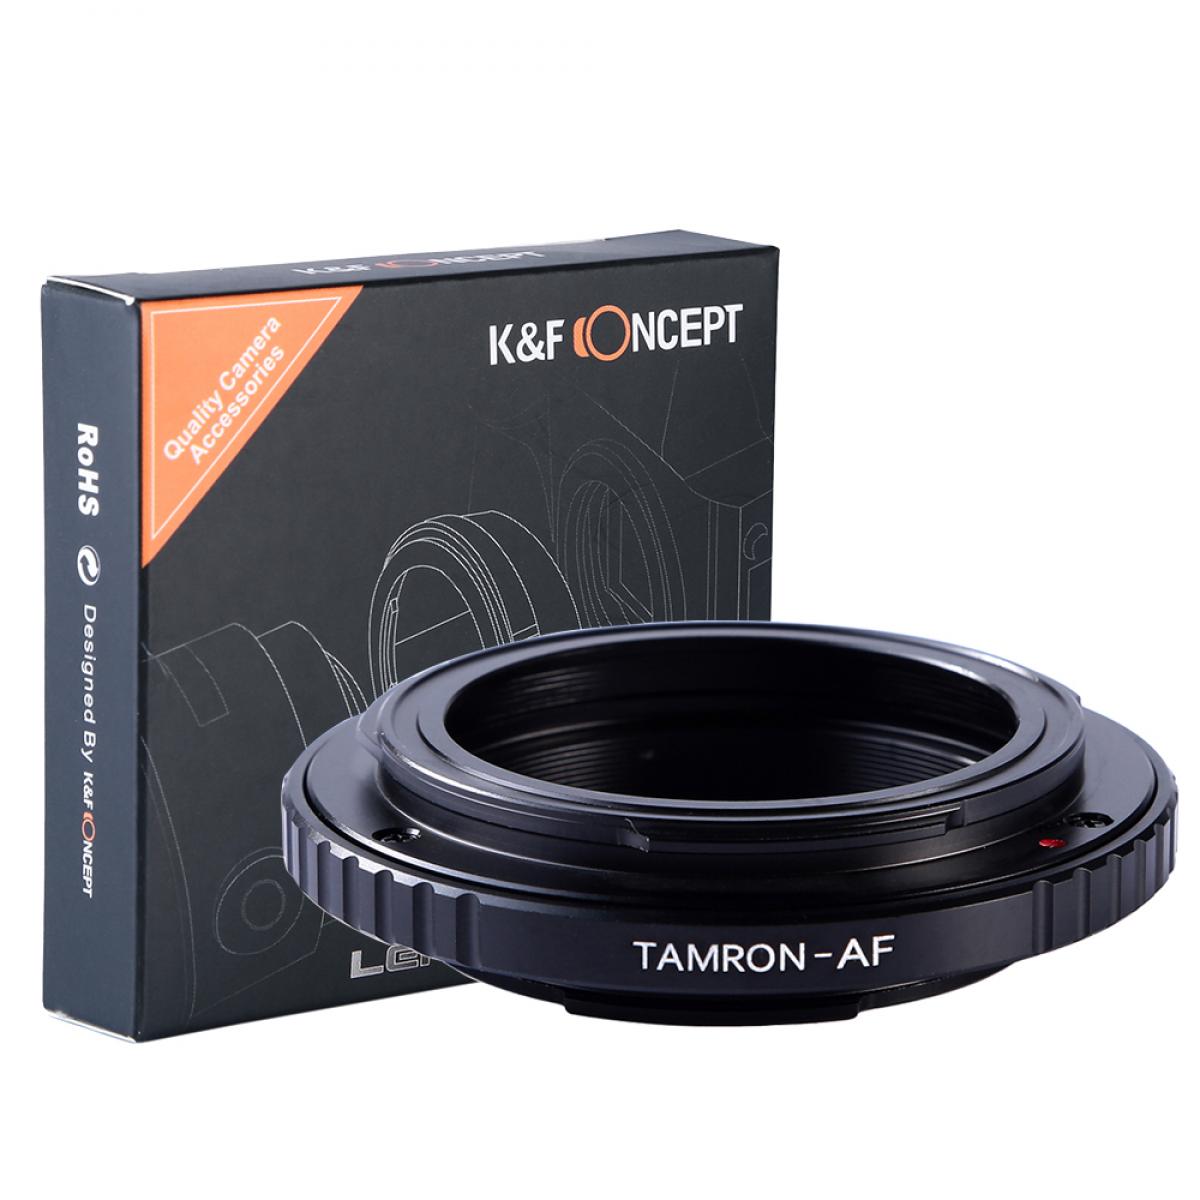 K&F Concept M23281 Tamron Adaptall II  Lenses to Sony A Lens Mount Adapter